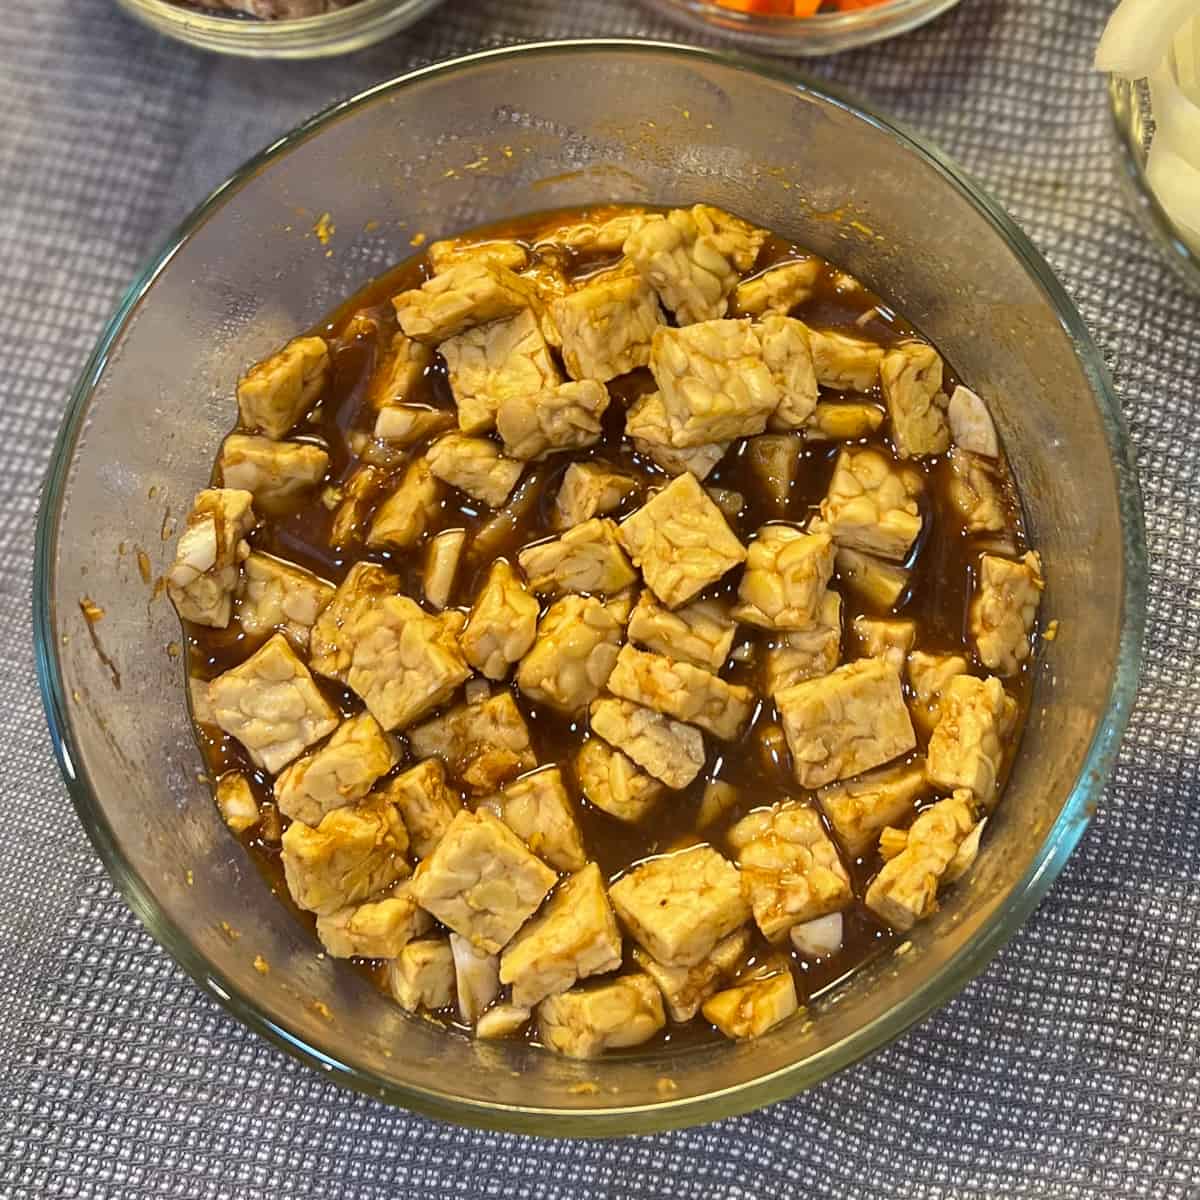 top view of glass bowl with tempeh being marinated in brown sauce